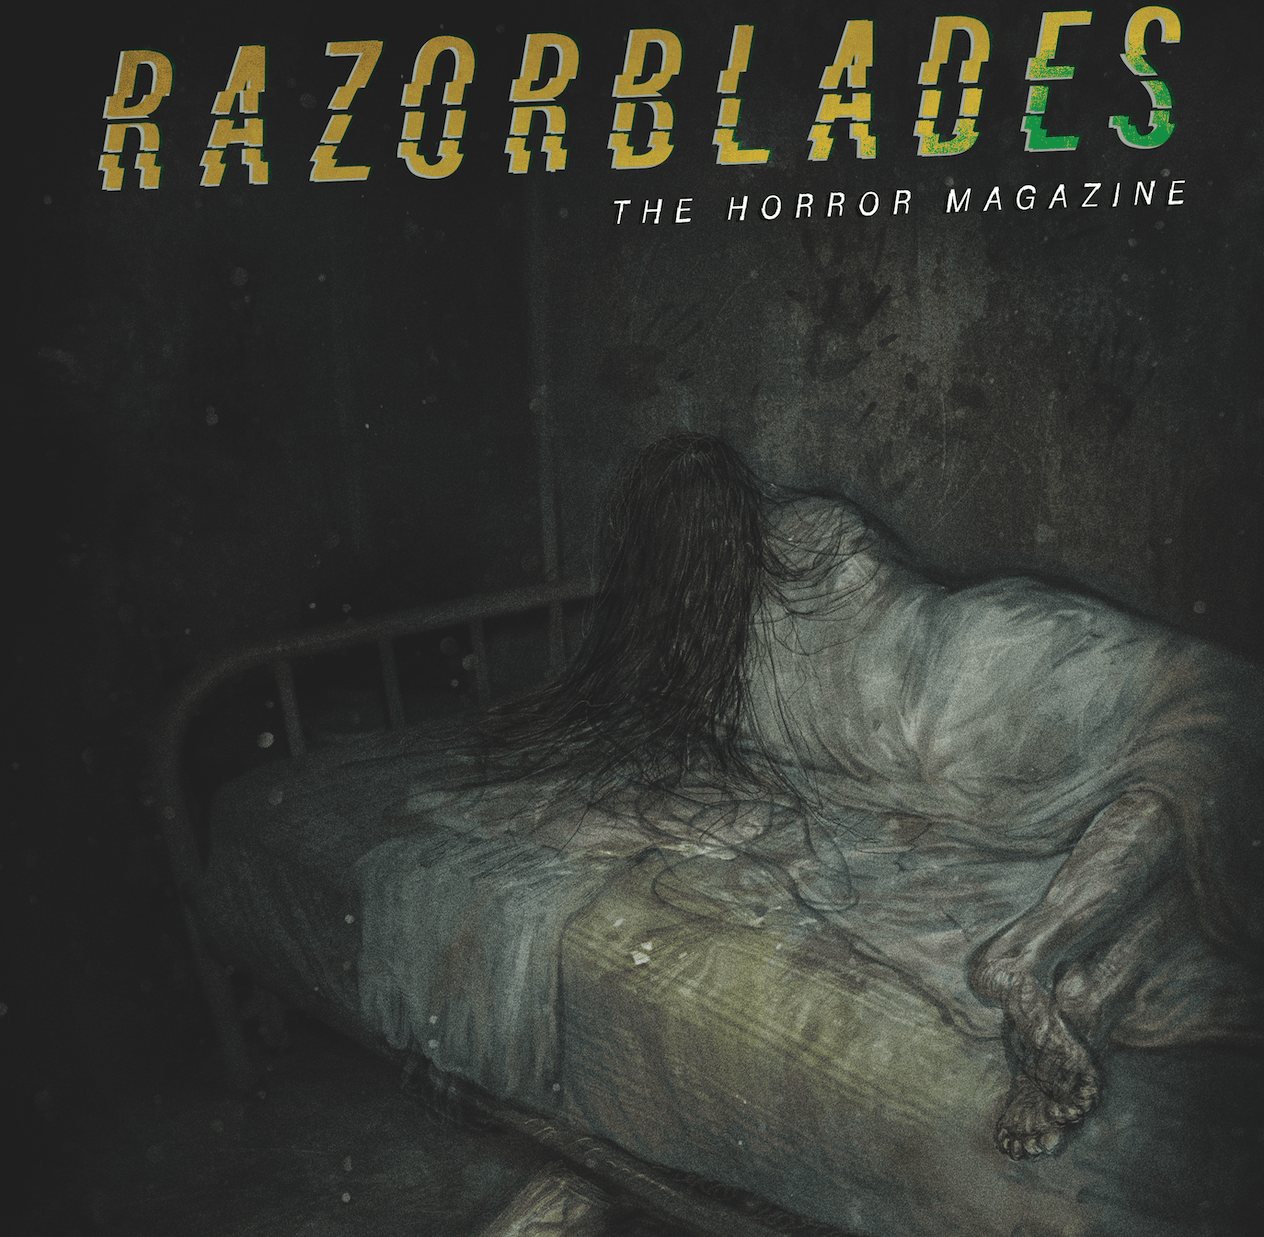 Razorblades: The Horror Magazine #3 features 80 pages and 'Department of Truth' team